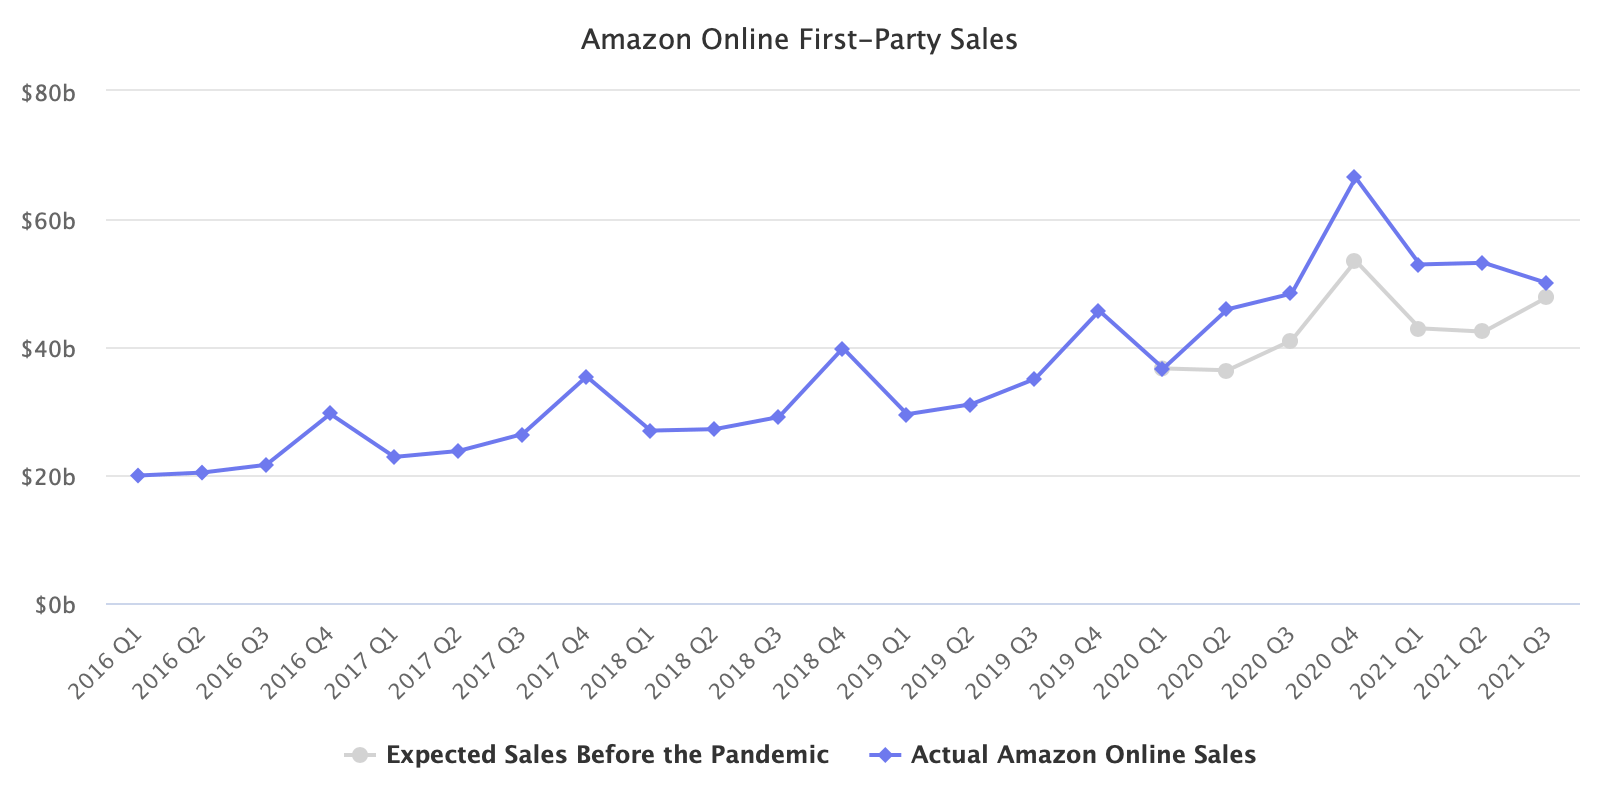 Amazon Online First-Party Sales